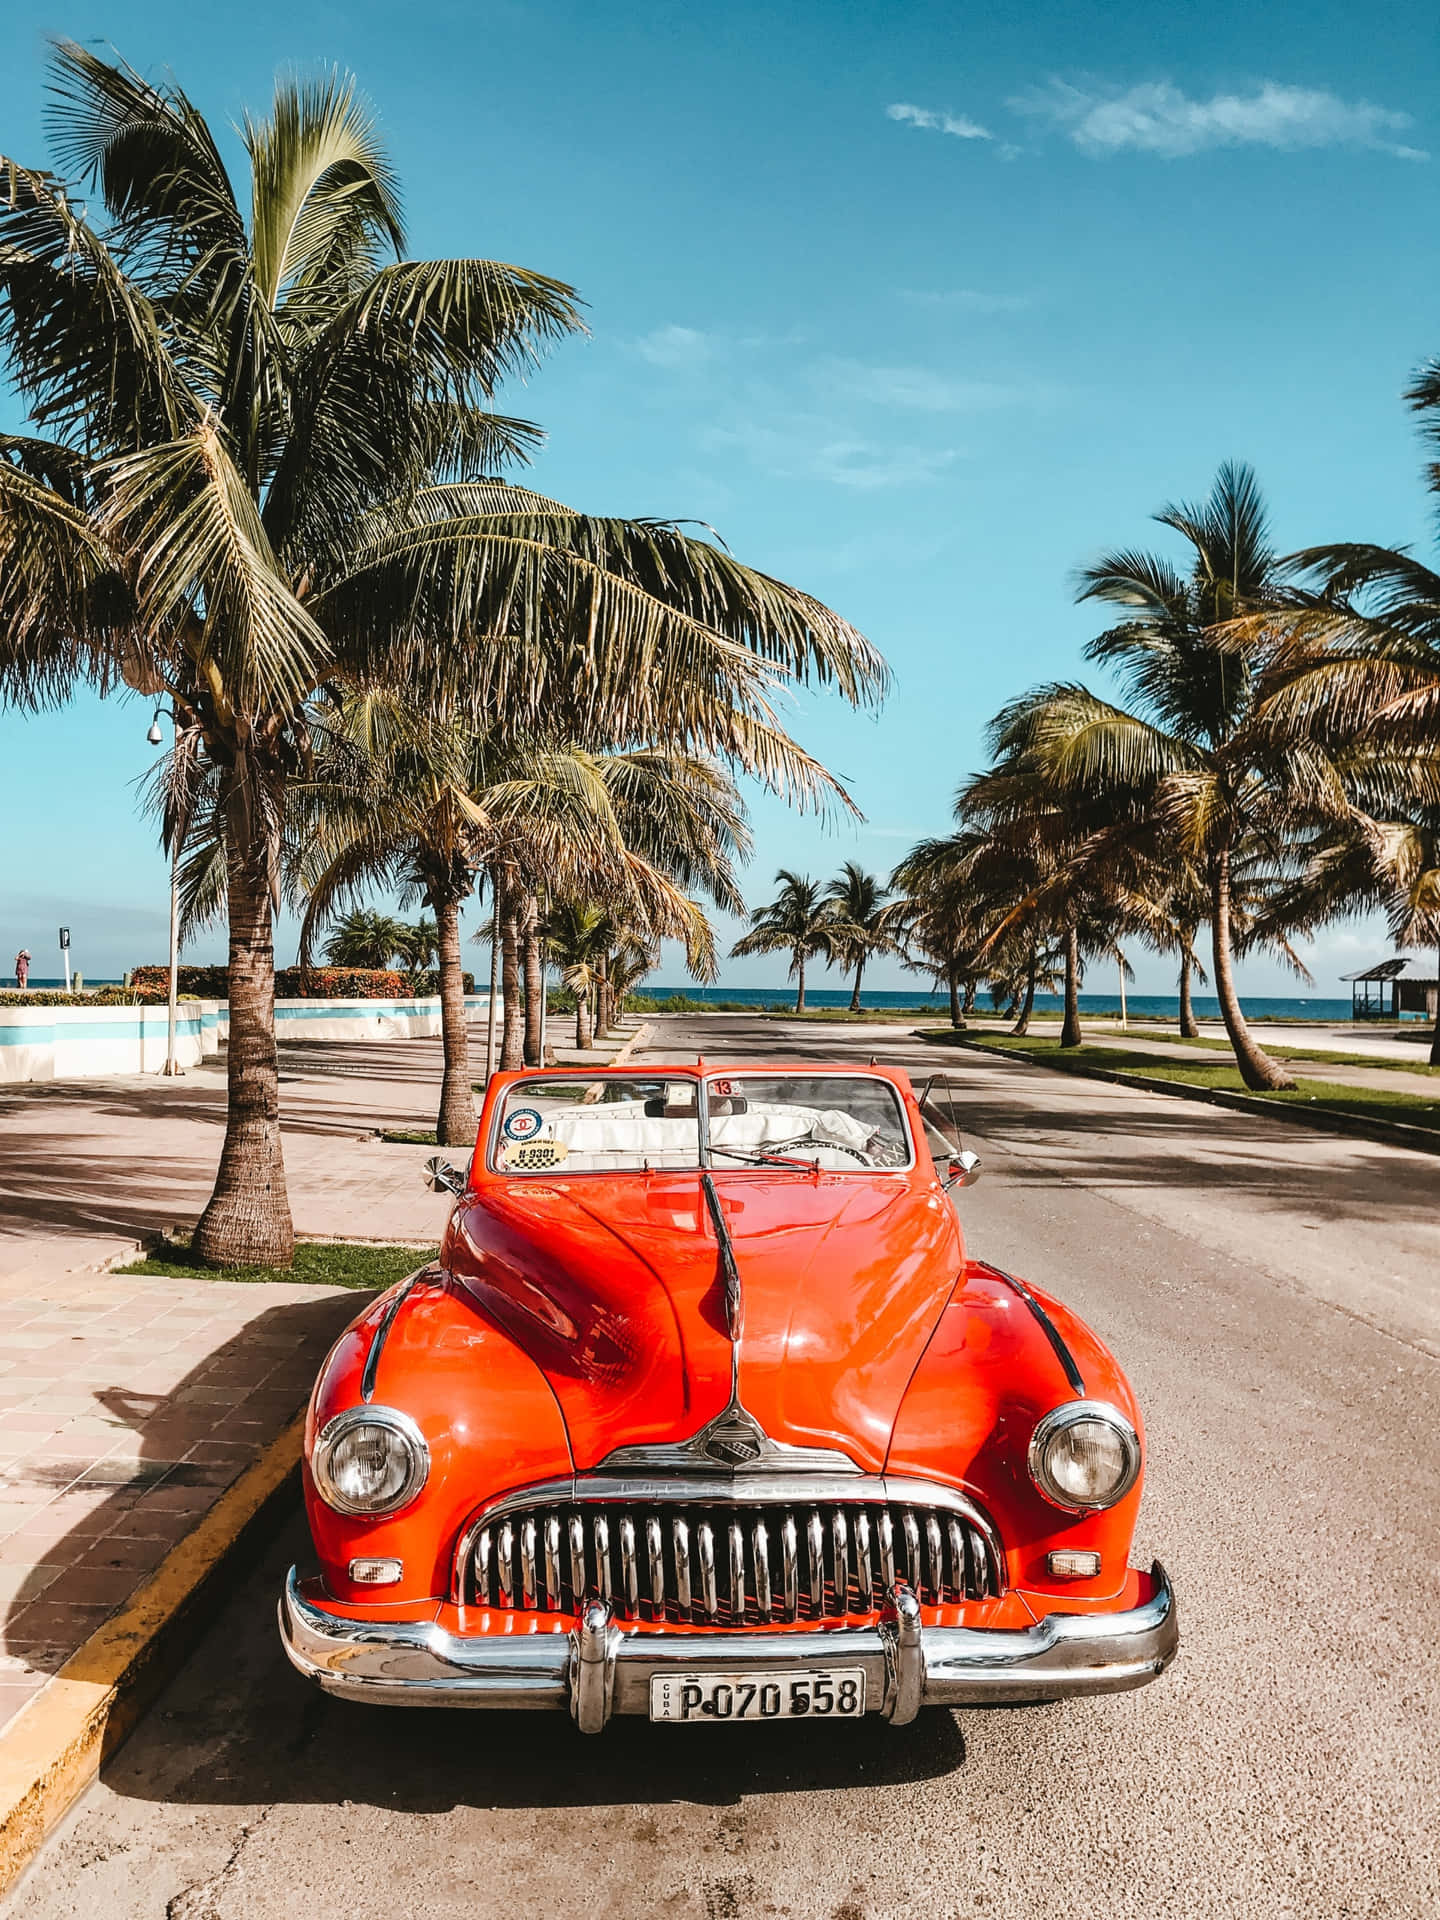 Vintage Car With Palm Trees Iphone Wallpaper